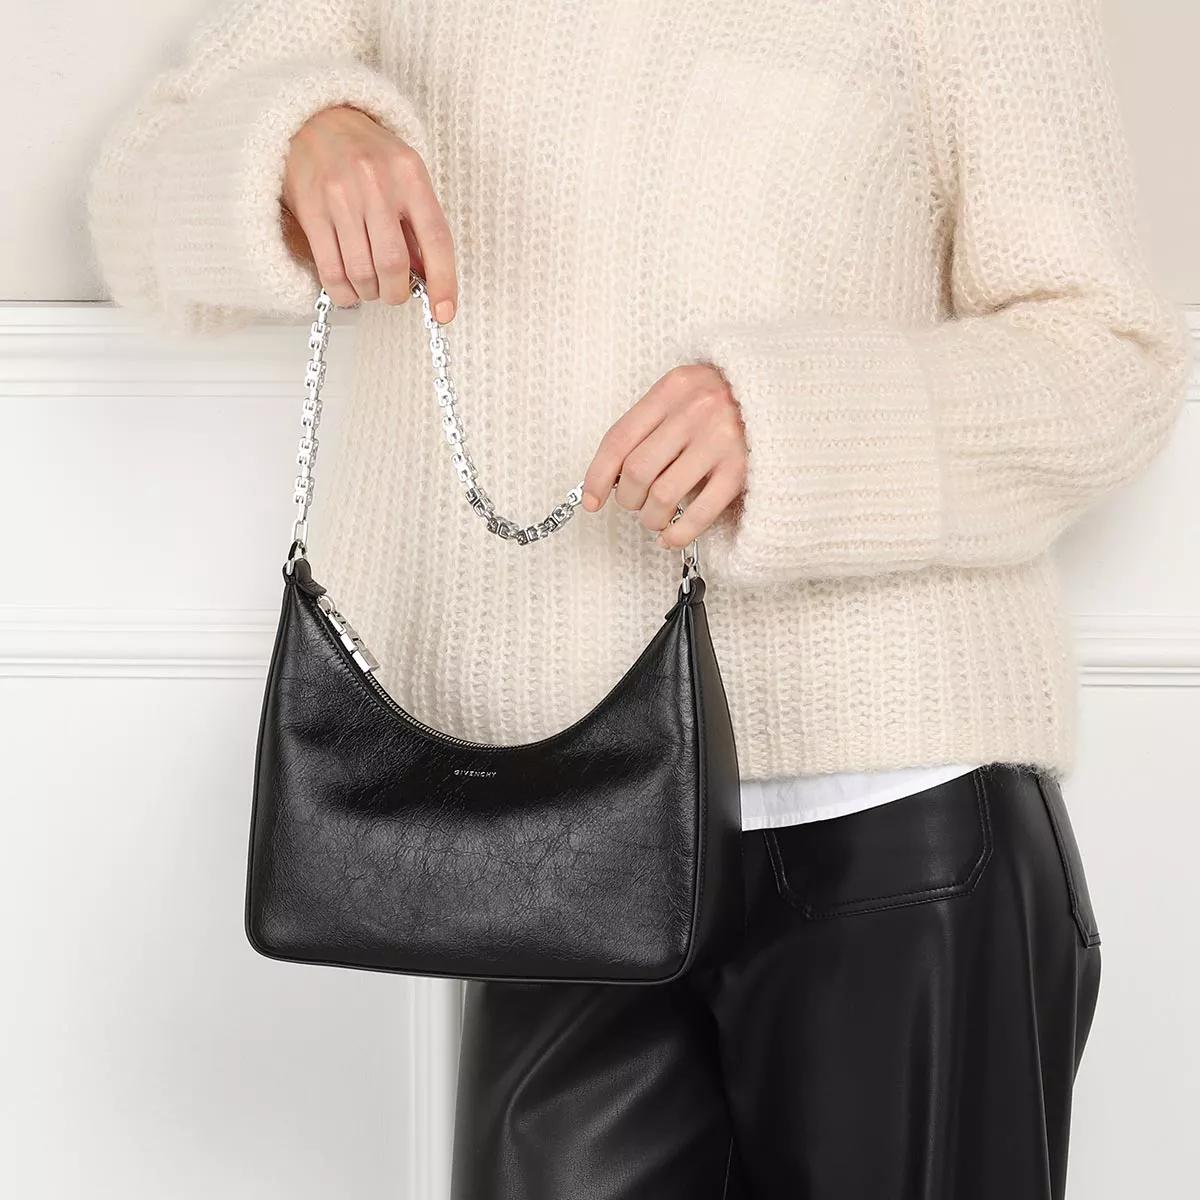 givenchy hobo bag - small moon cut out bag leather with sporty strap - gr. unisize - in - fÃ¼r damen schwarz donna